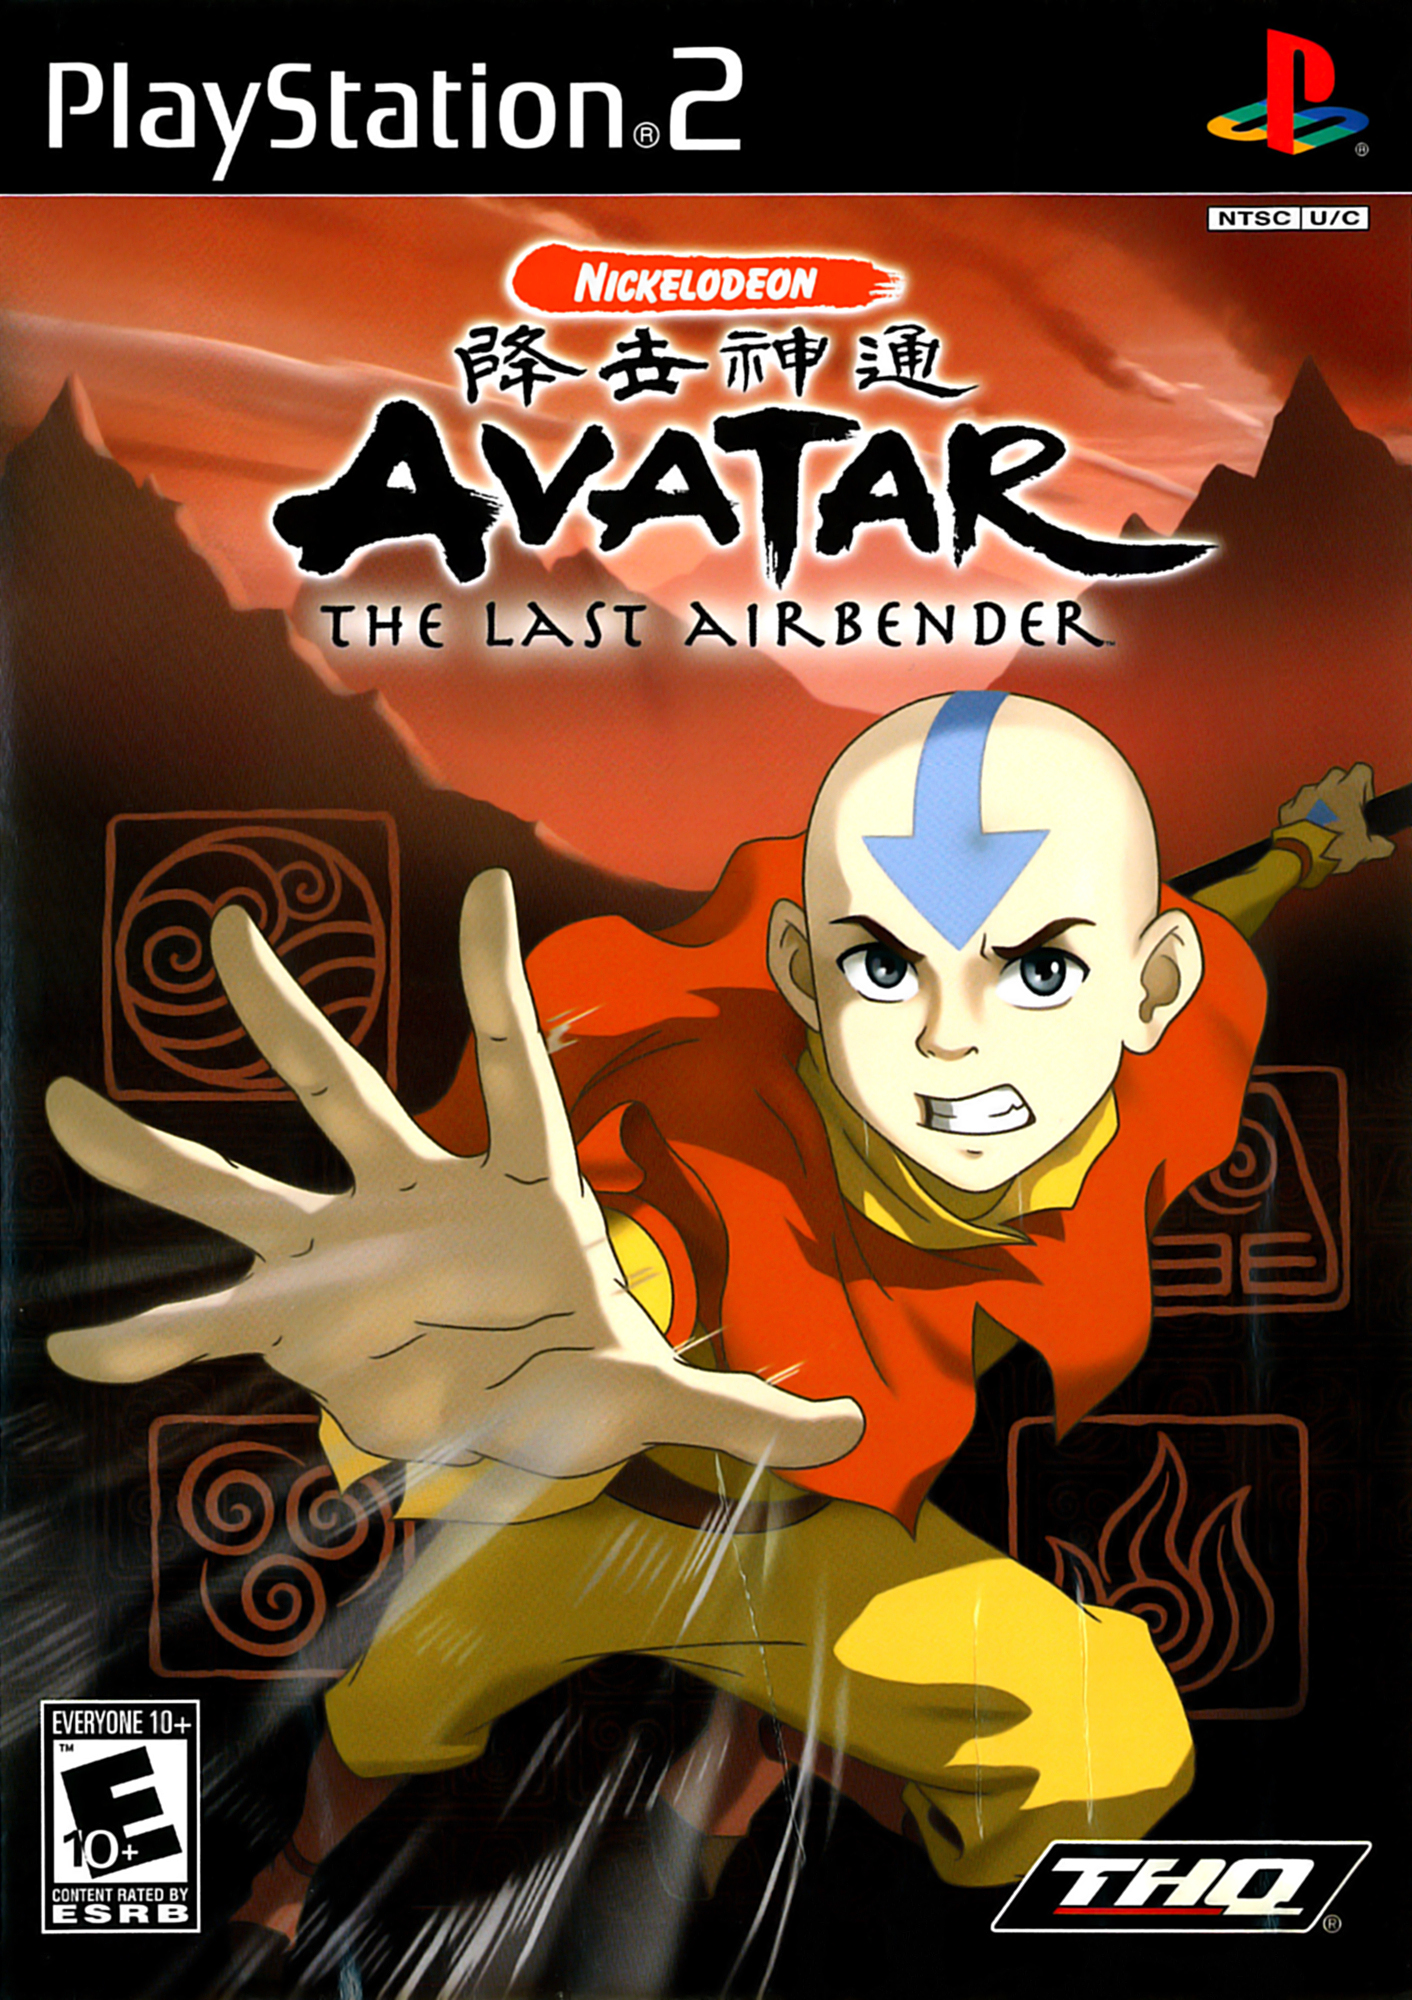 Buy Avatar the Last Airbender PlayStation 2 Online at Lowest Price ...